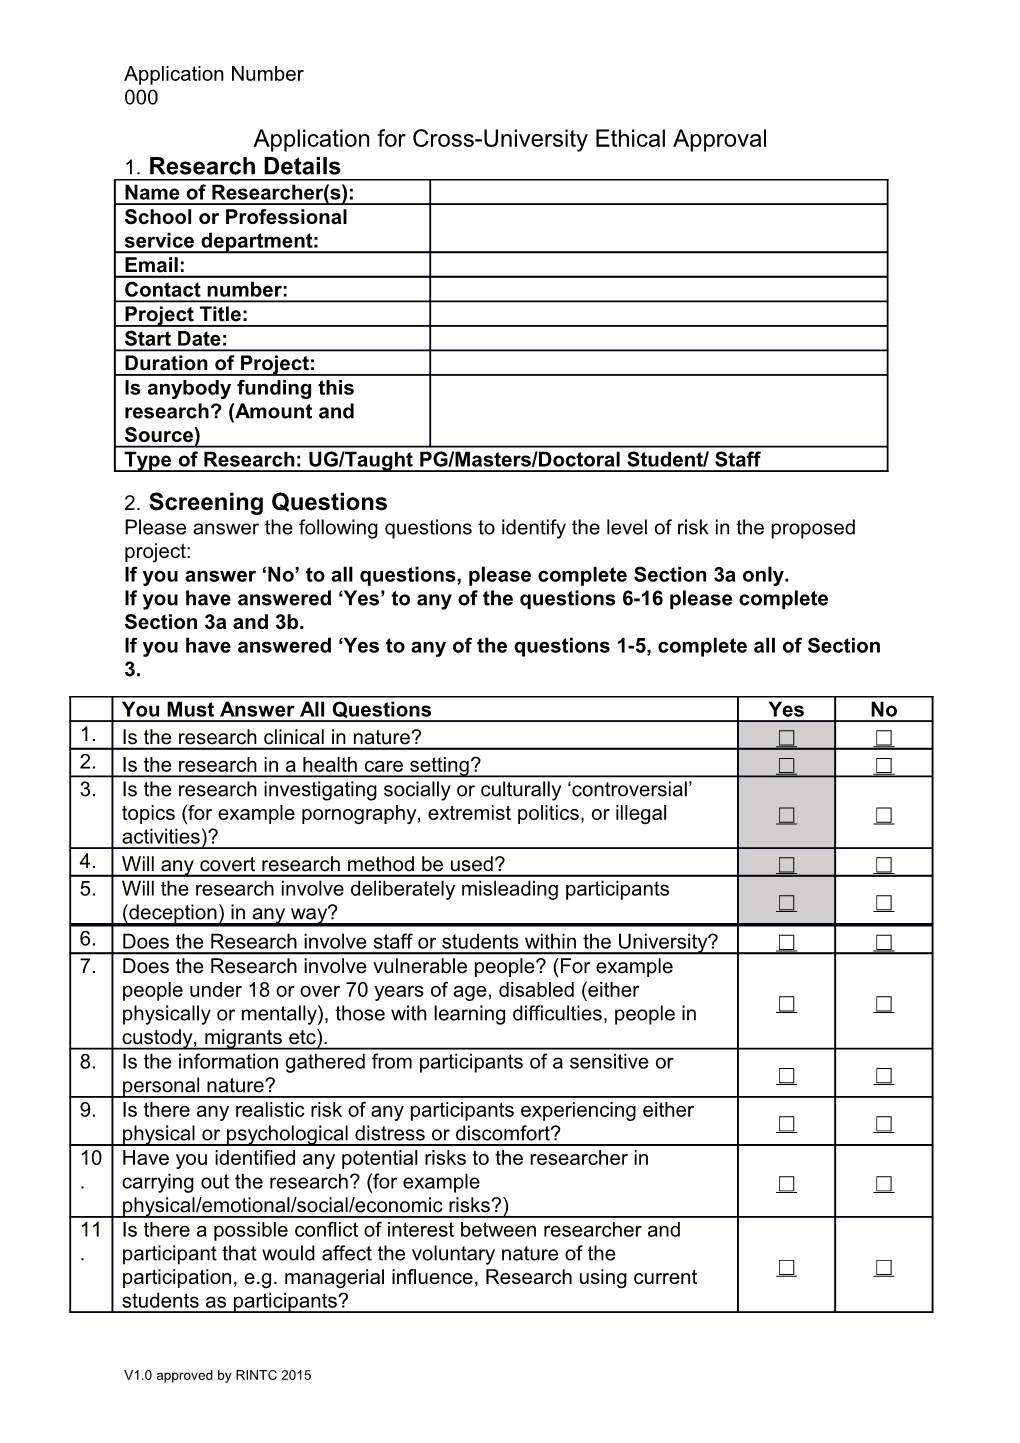 Cross University Ethical Approval Form October 2015